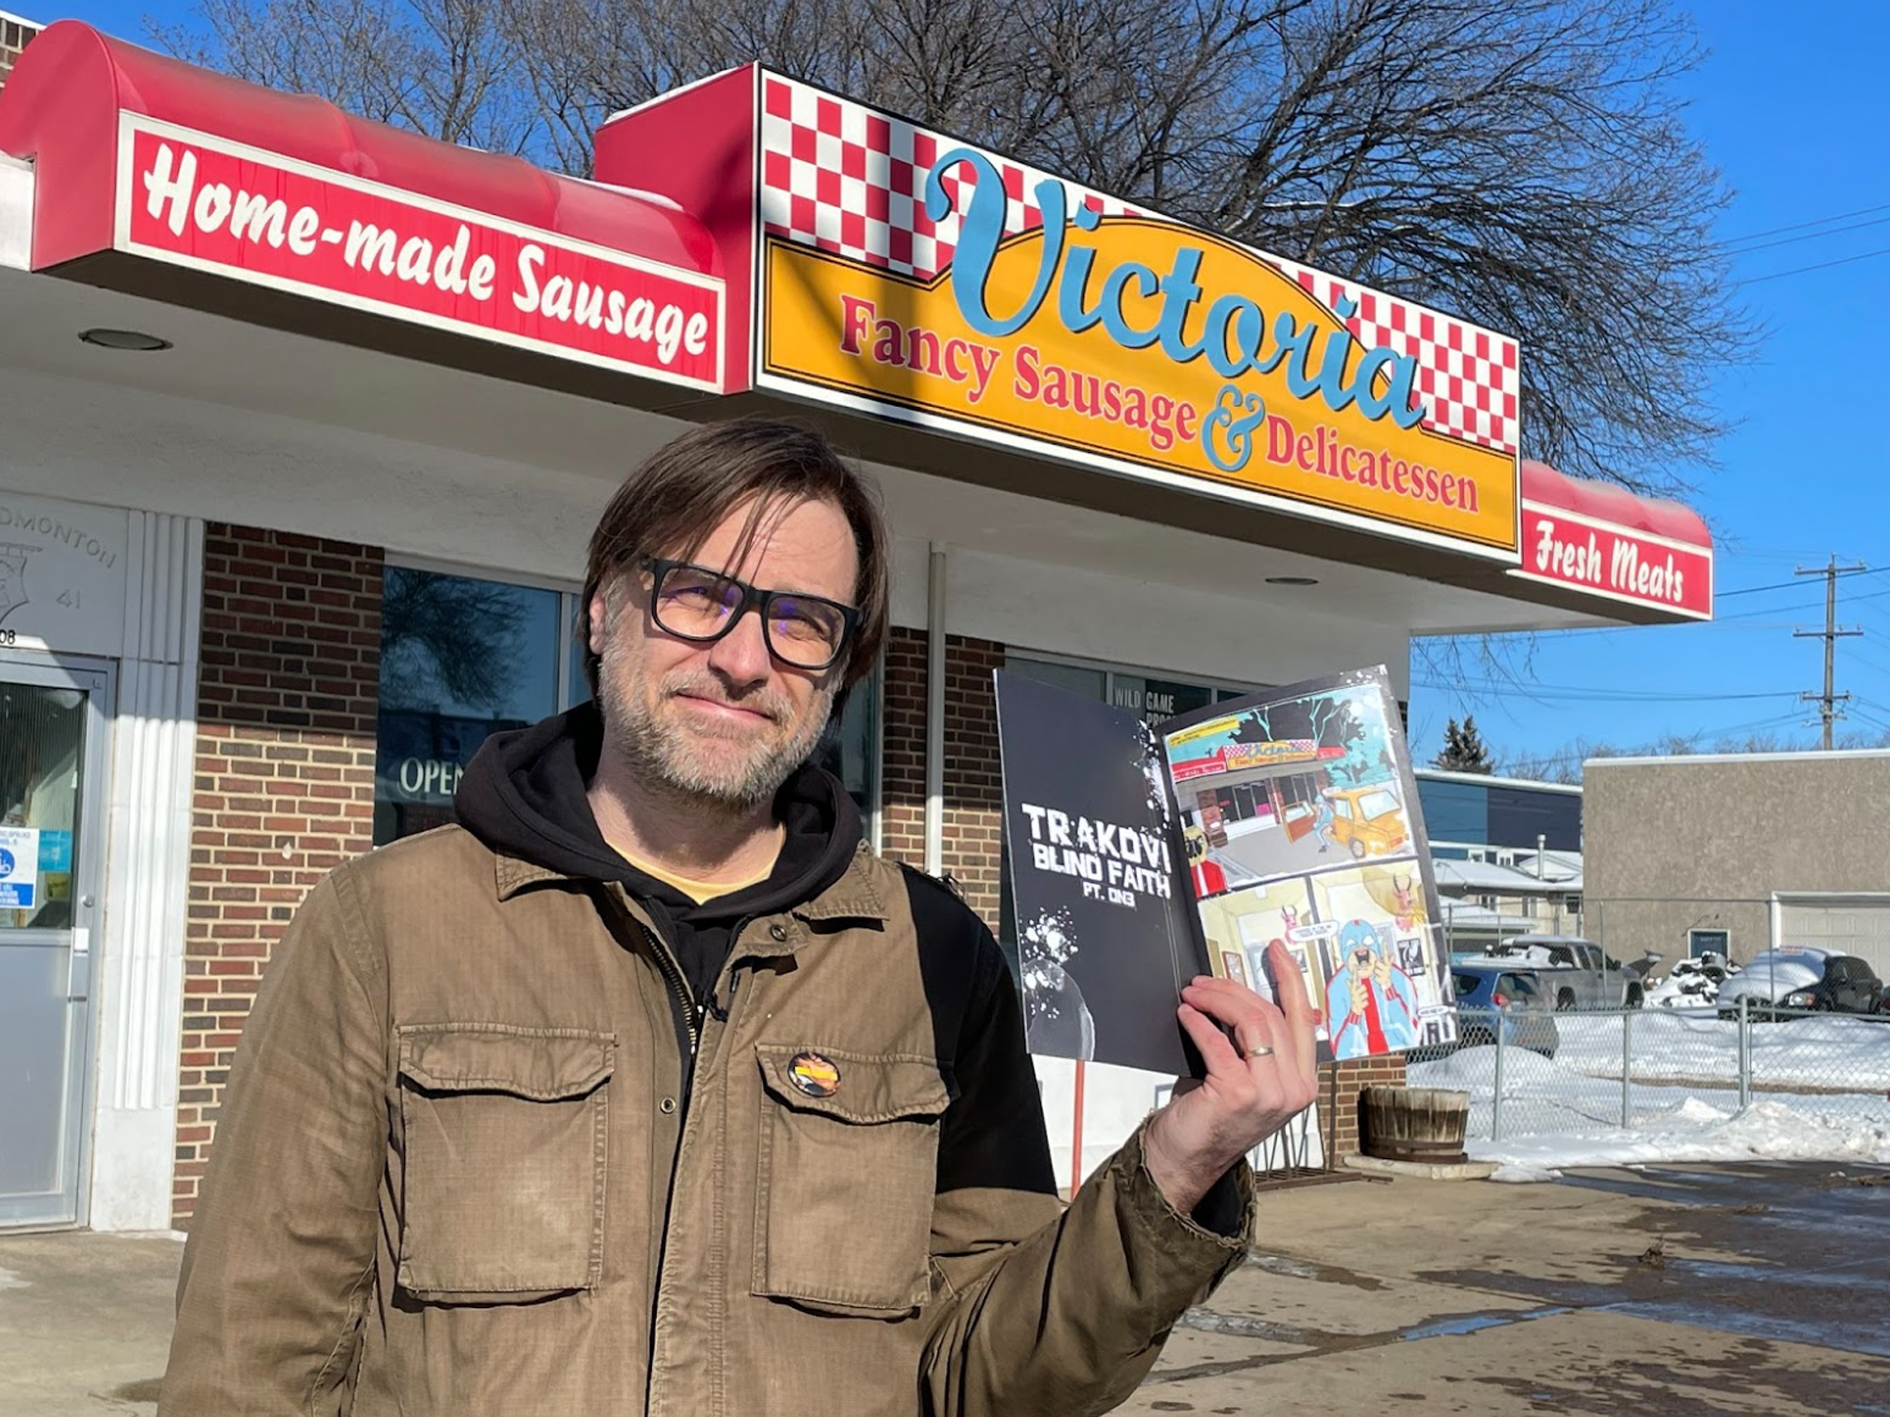 Adriean Koleric holds up a copy of his comic book, Trakovi: The Slav With No Remorse, in front of a deli shop in northeast Edmonton.